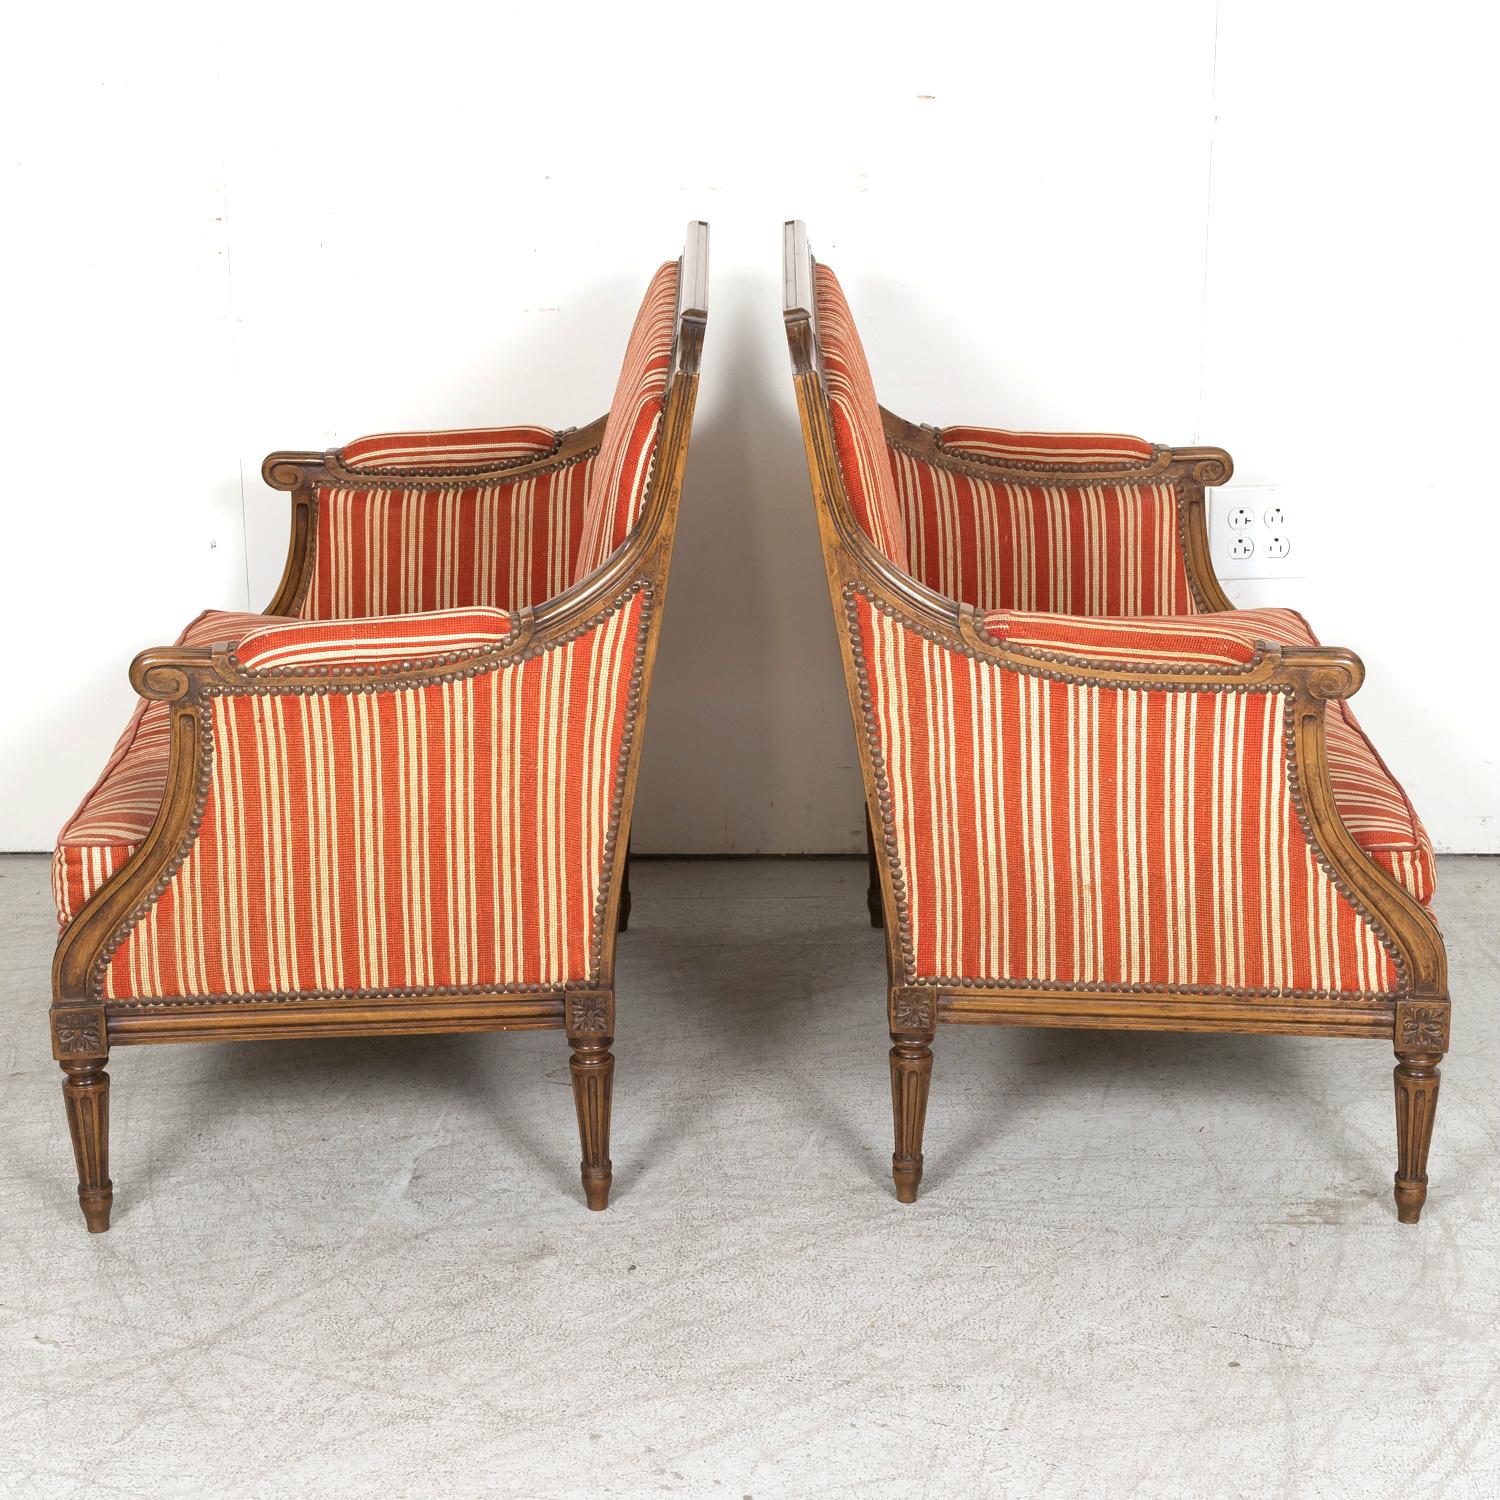 Pair of 19th Century French Louis XVI Style Oversized Bergere Marquise Armchairs For Sale 9